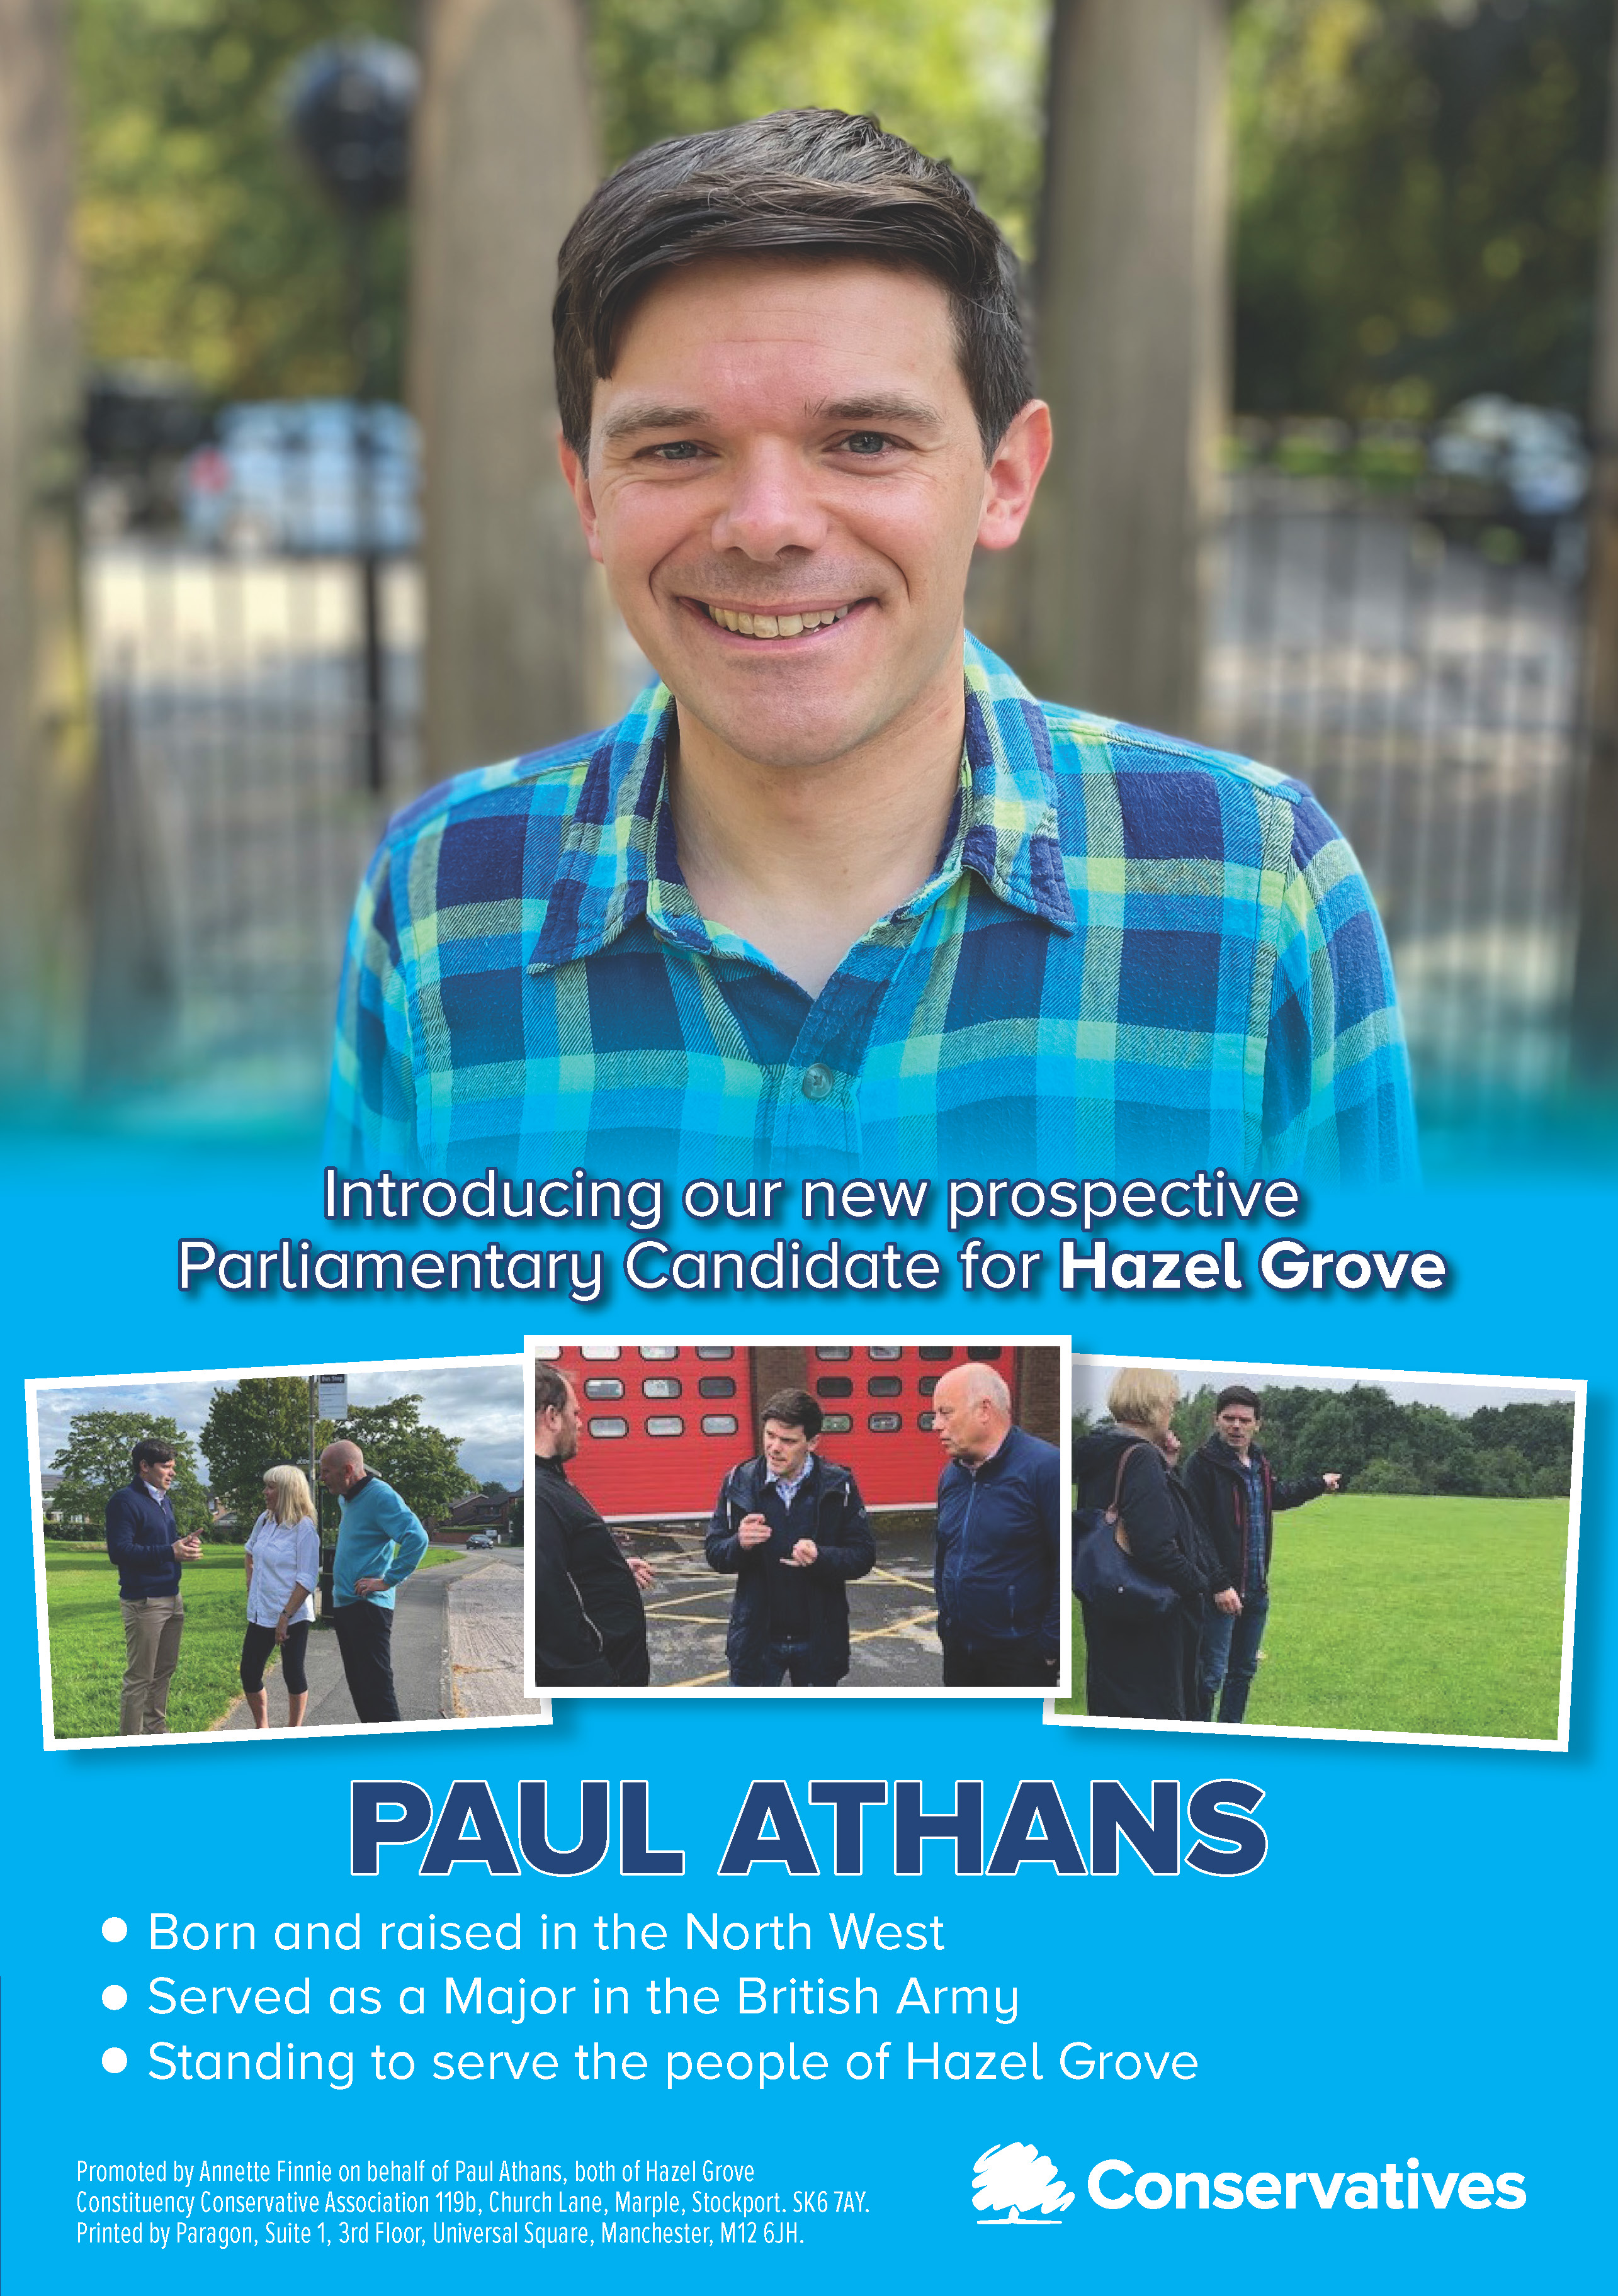 Paul Athans A5 Intro Leaflet pg 1